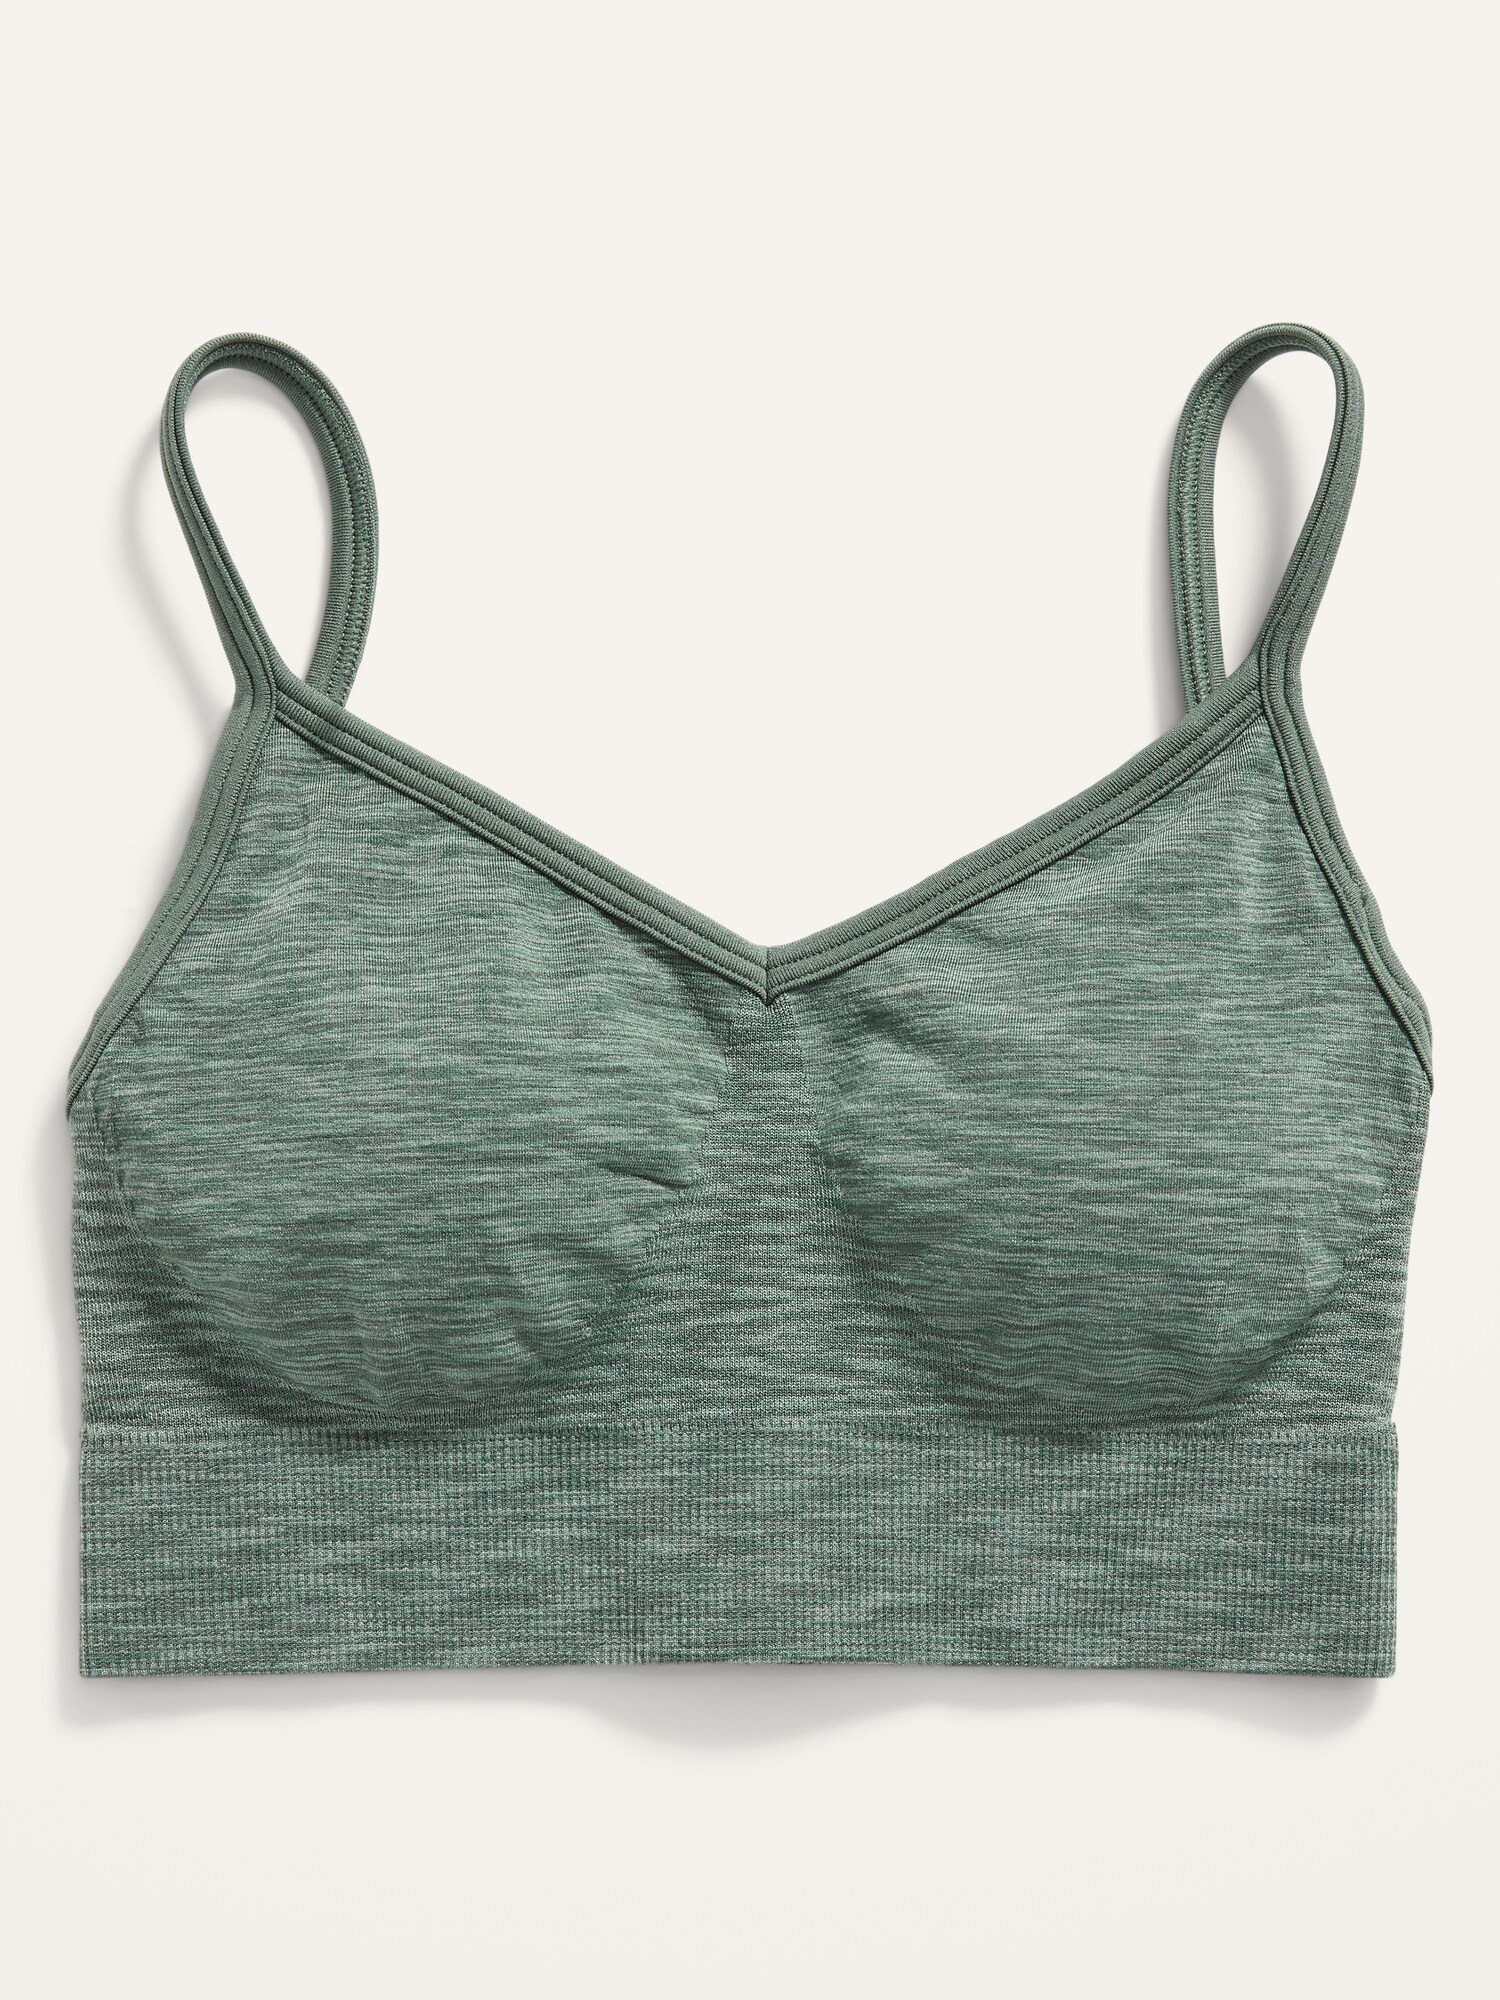 Old Navy Light Support Seamless Convertible Racerback Sports Bra for Women  XS-4X - ShopStyle